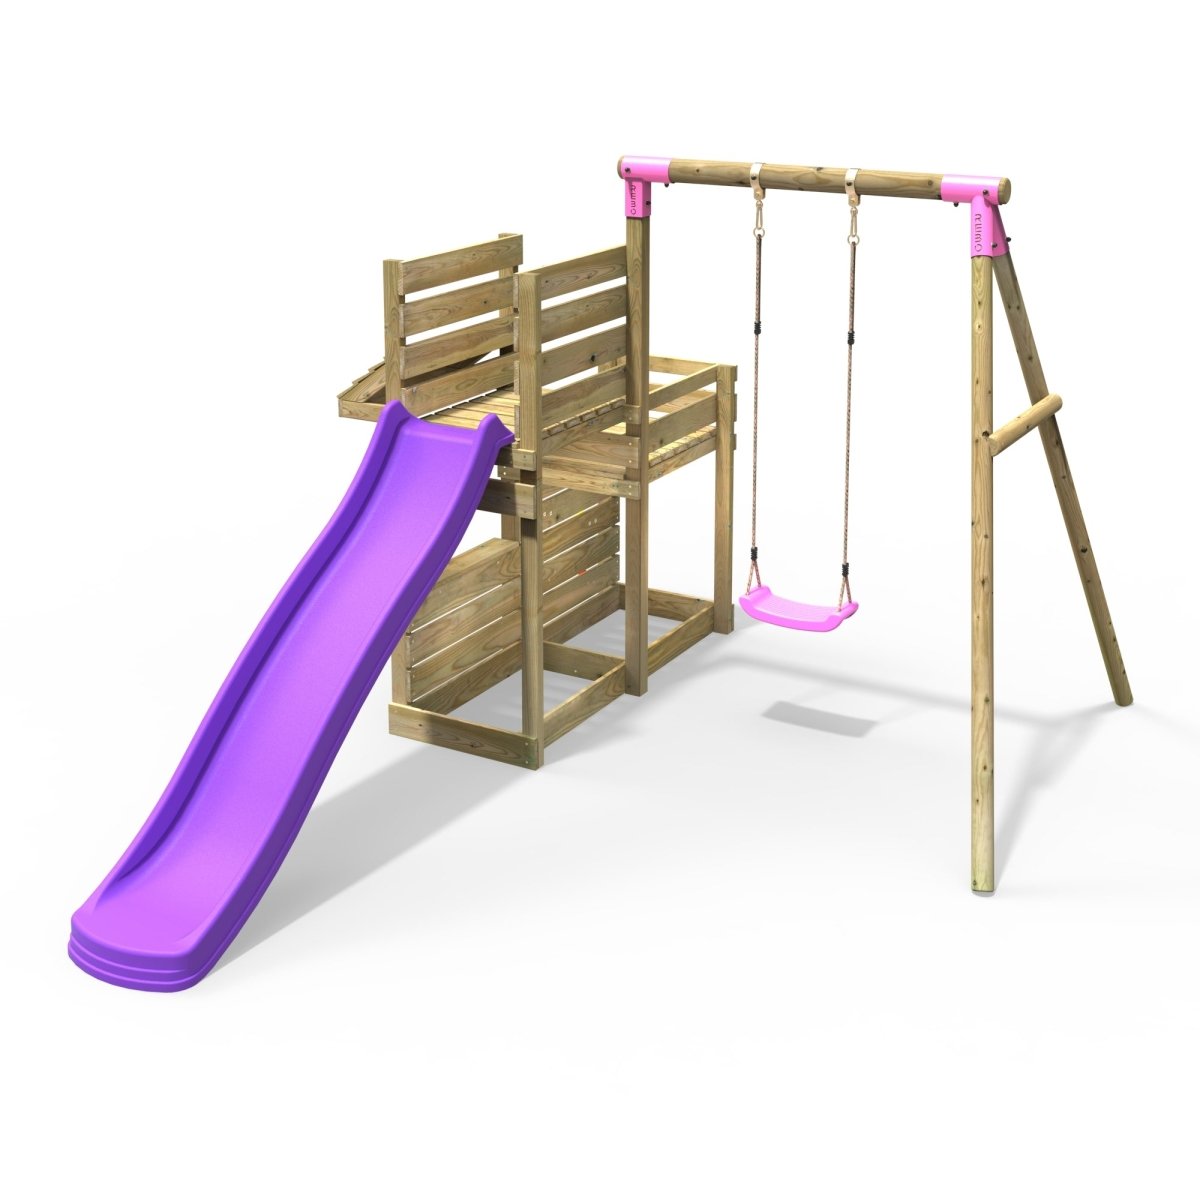 Rebo Wooden Swing Set with Deluxe Add on Deck & 8FT Slide - Solar Pink